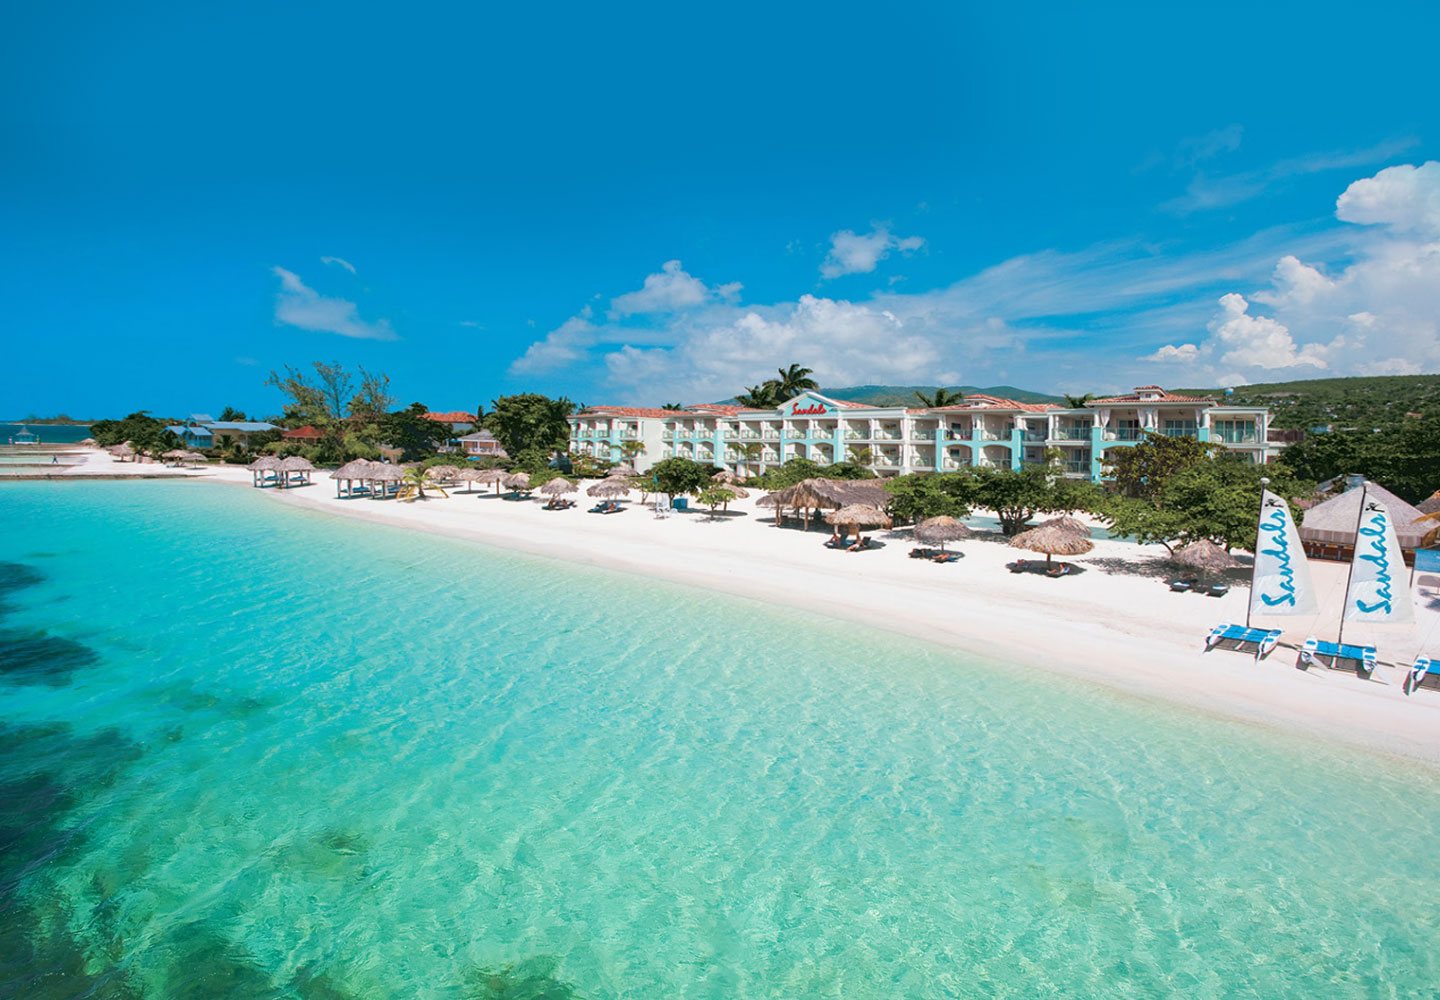 Sandals Resorts International is exploring strategic options including a potential sale